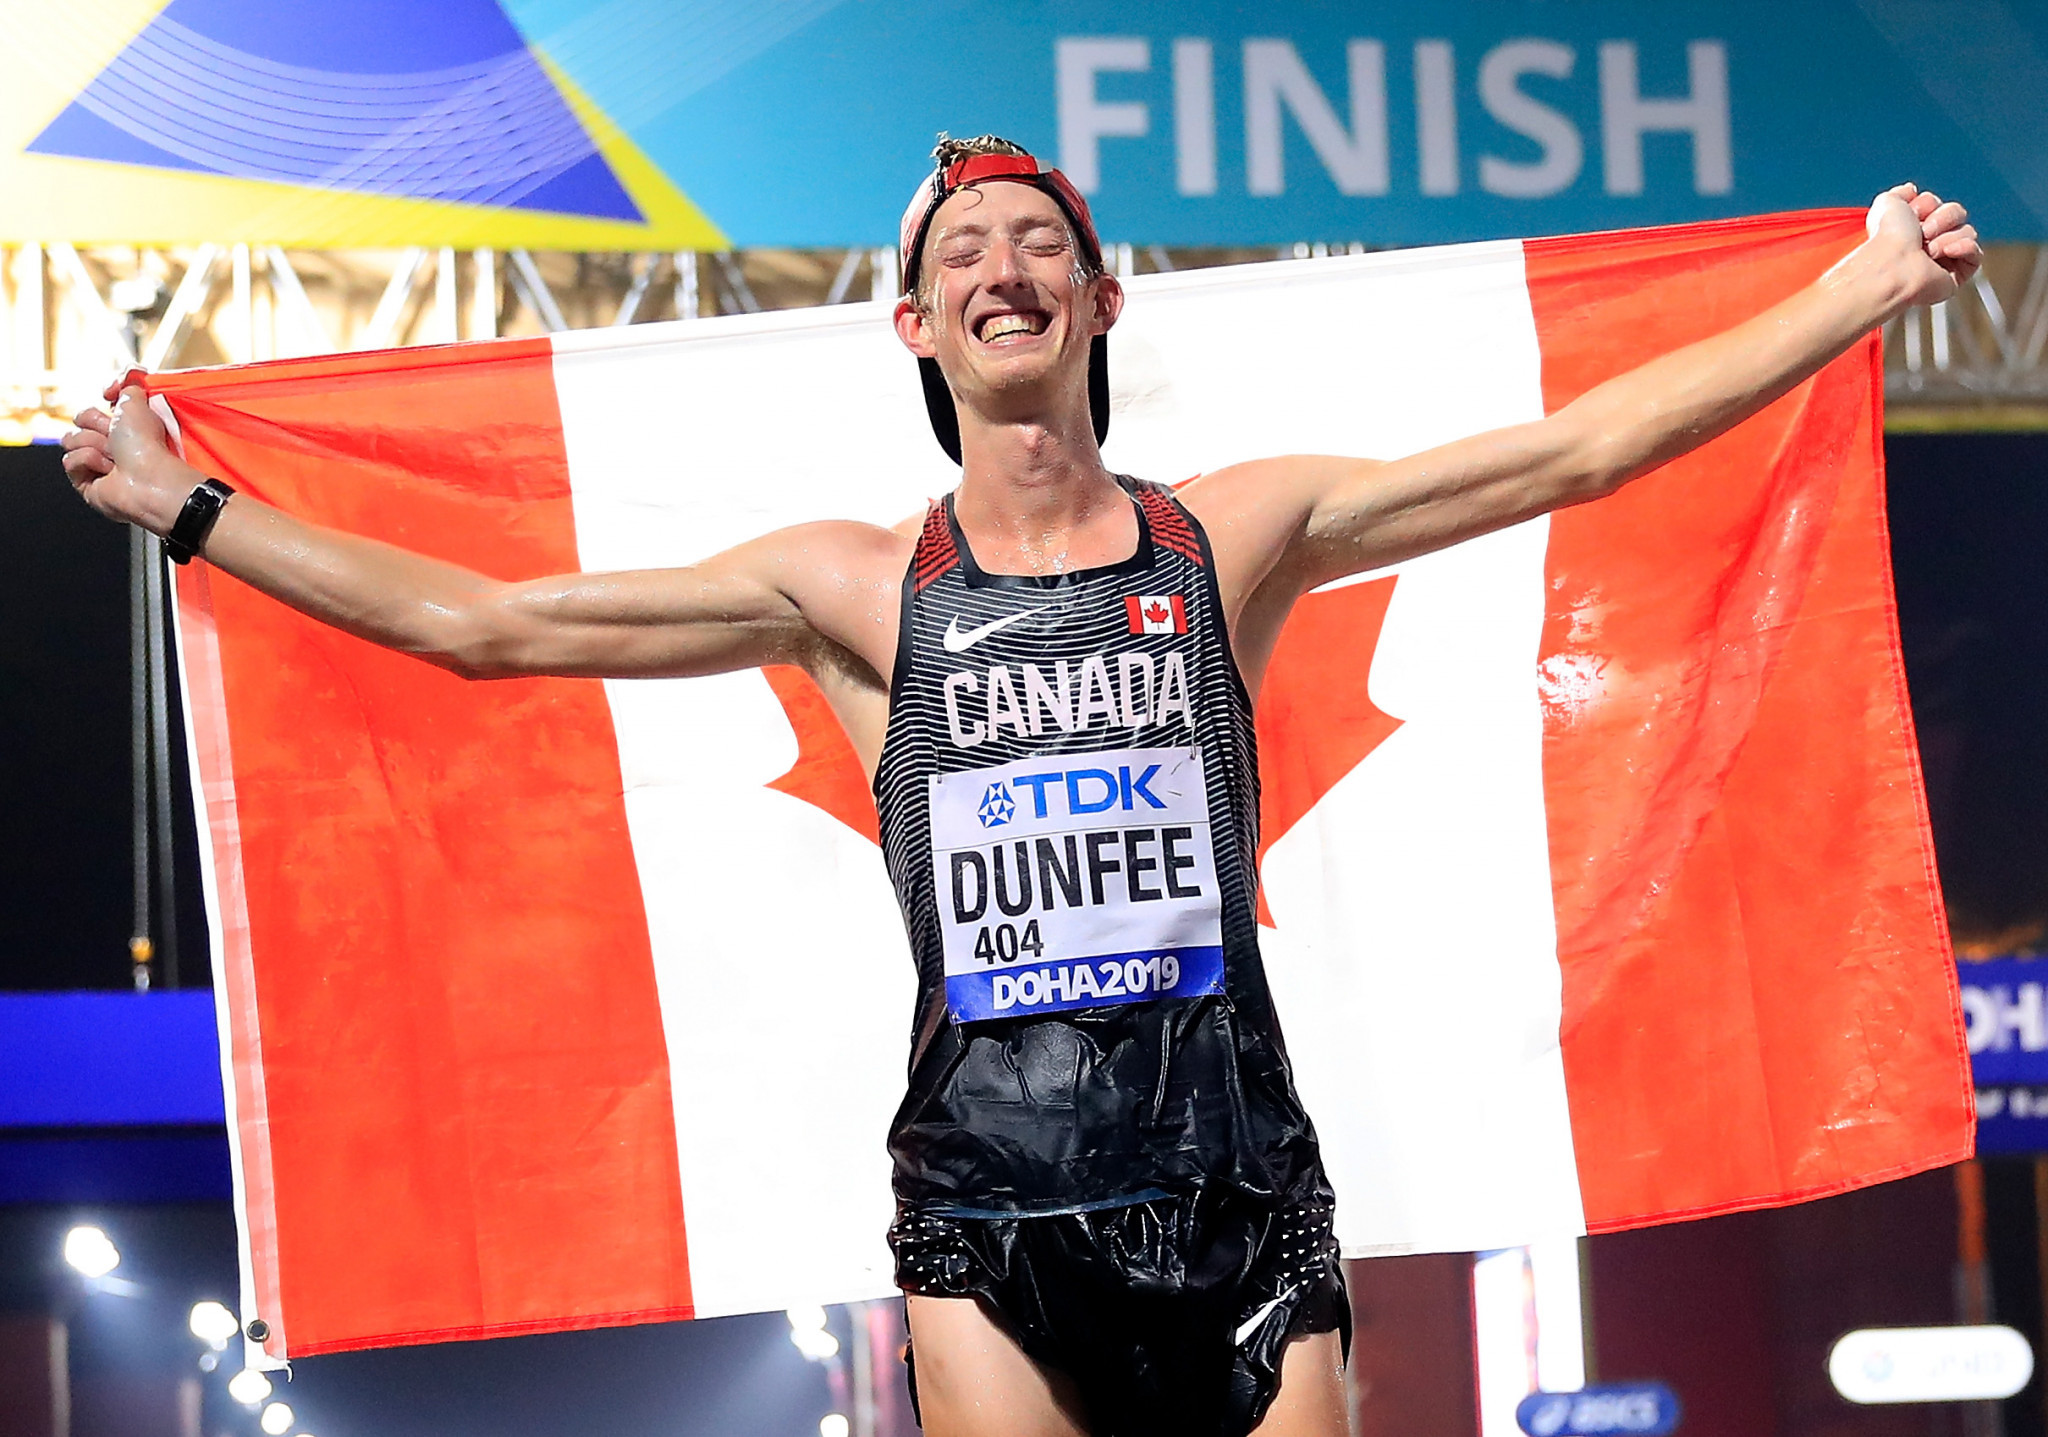 Canada's World Championships 50km race walk bronze medallist Evan Dunfee has accused the IOC of "hypocrisy" after moving the Olympic marathons and race walks but staging other events in Tokyo ©Getty images